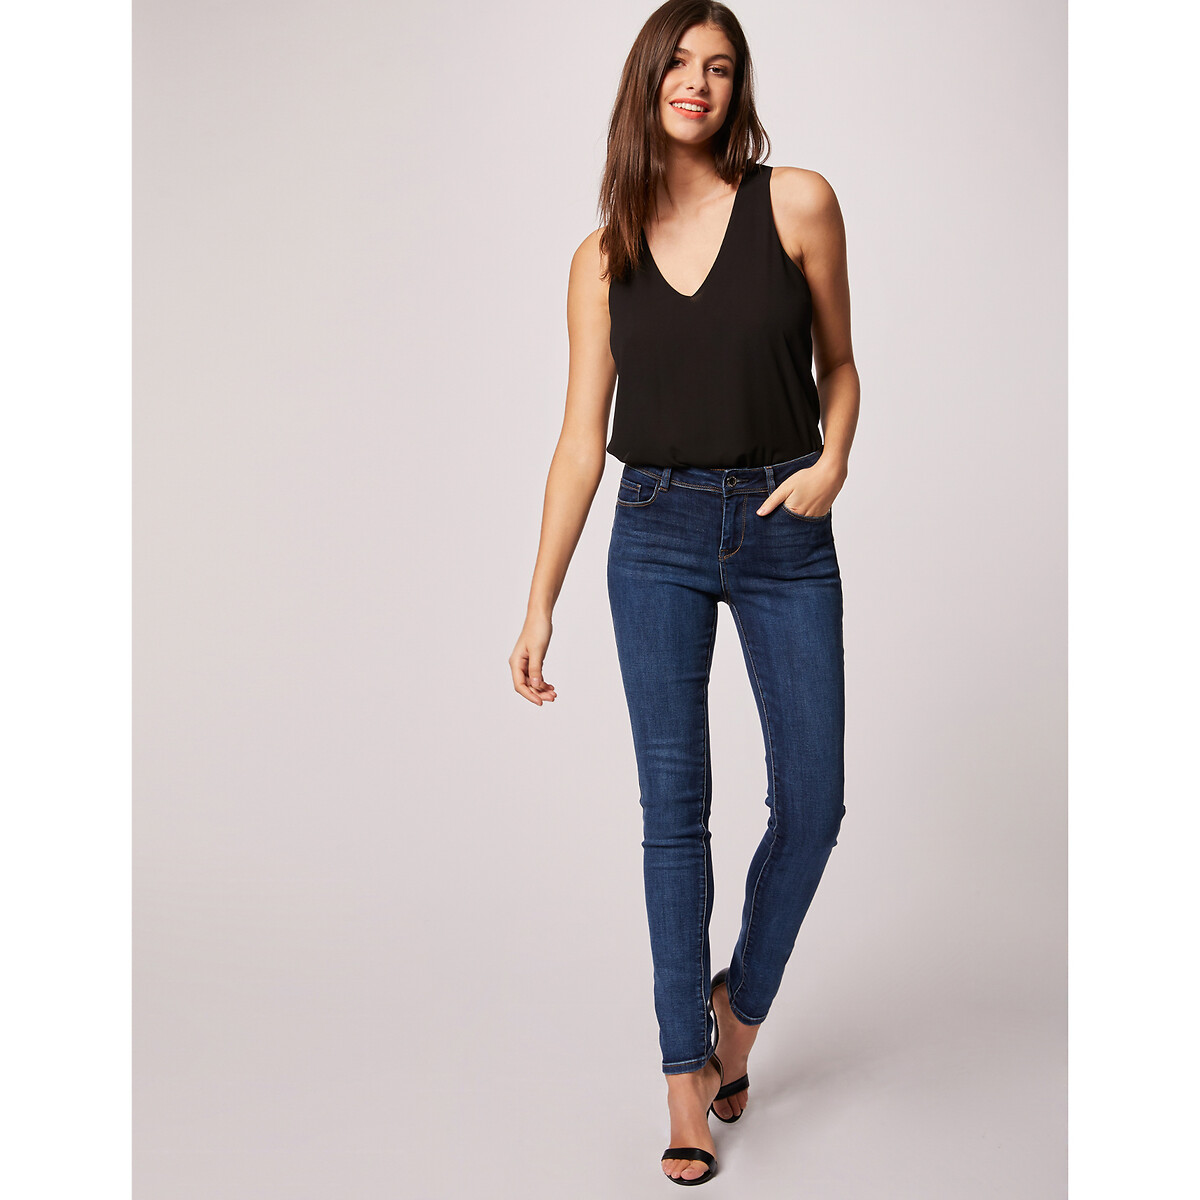 Untreated slim fit jeans, blue stonewashed, Morgan | La Redoute